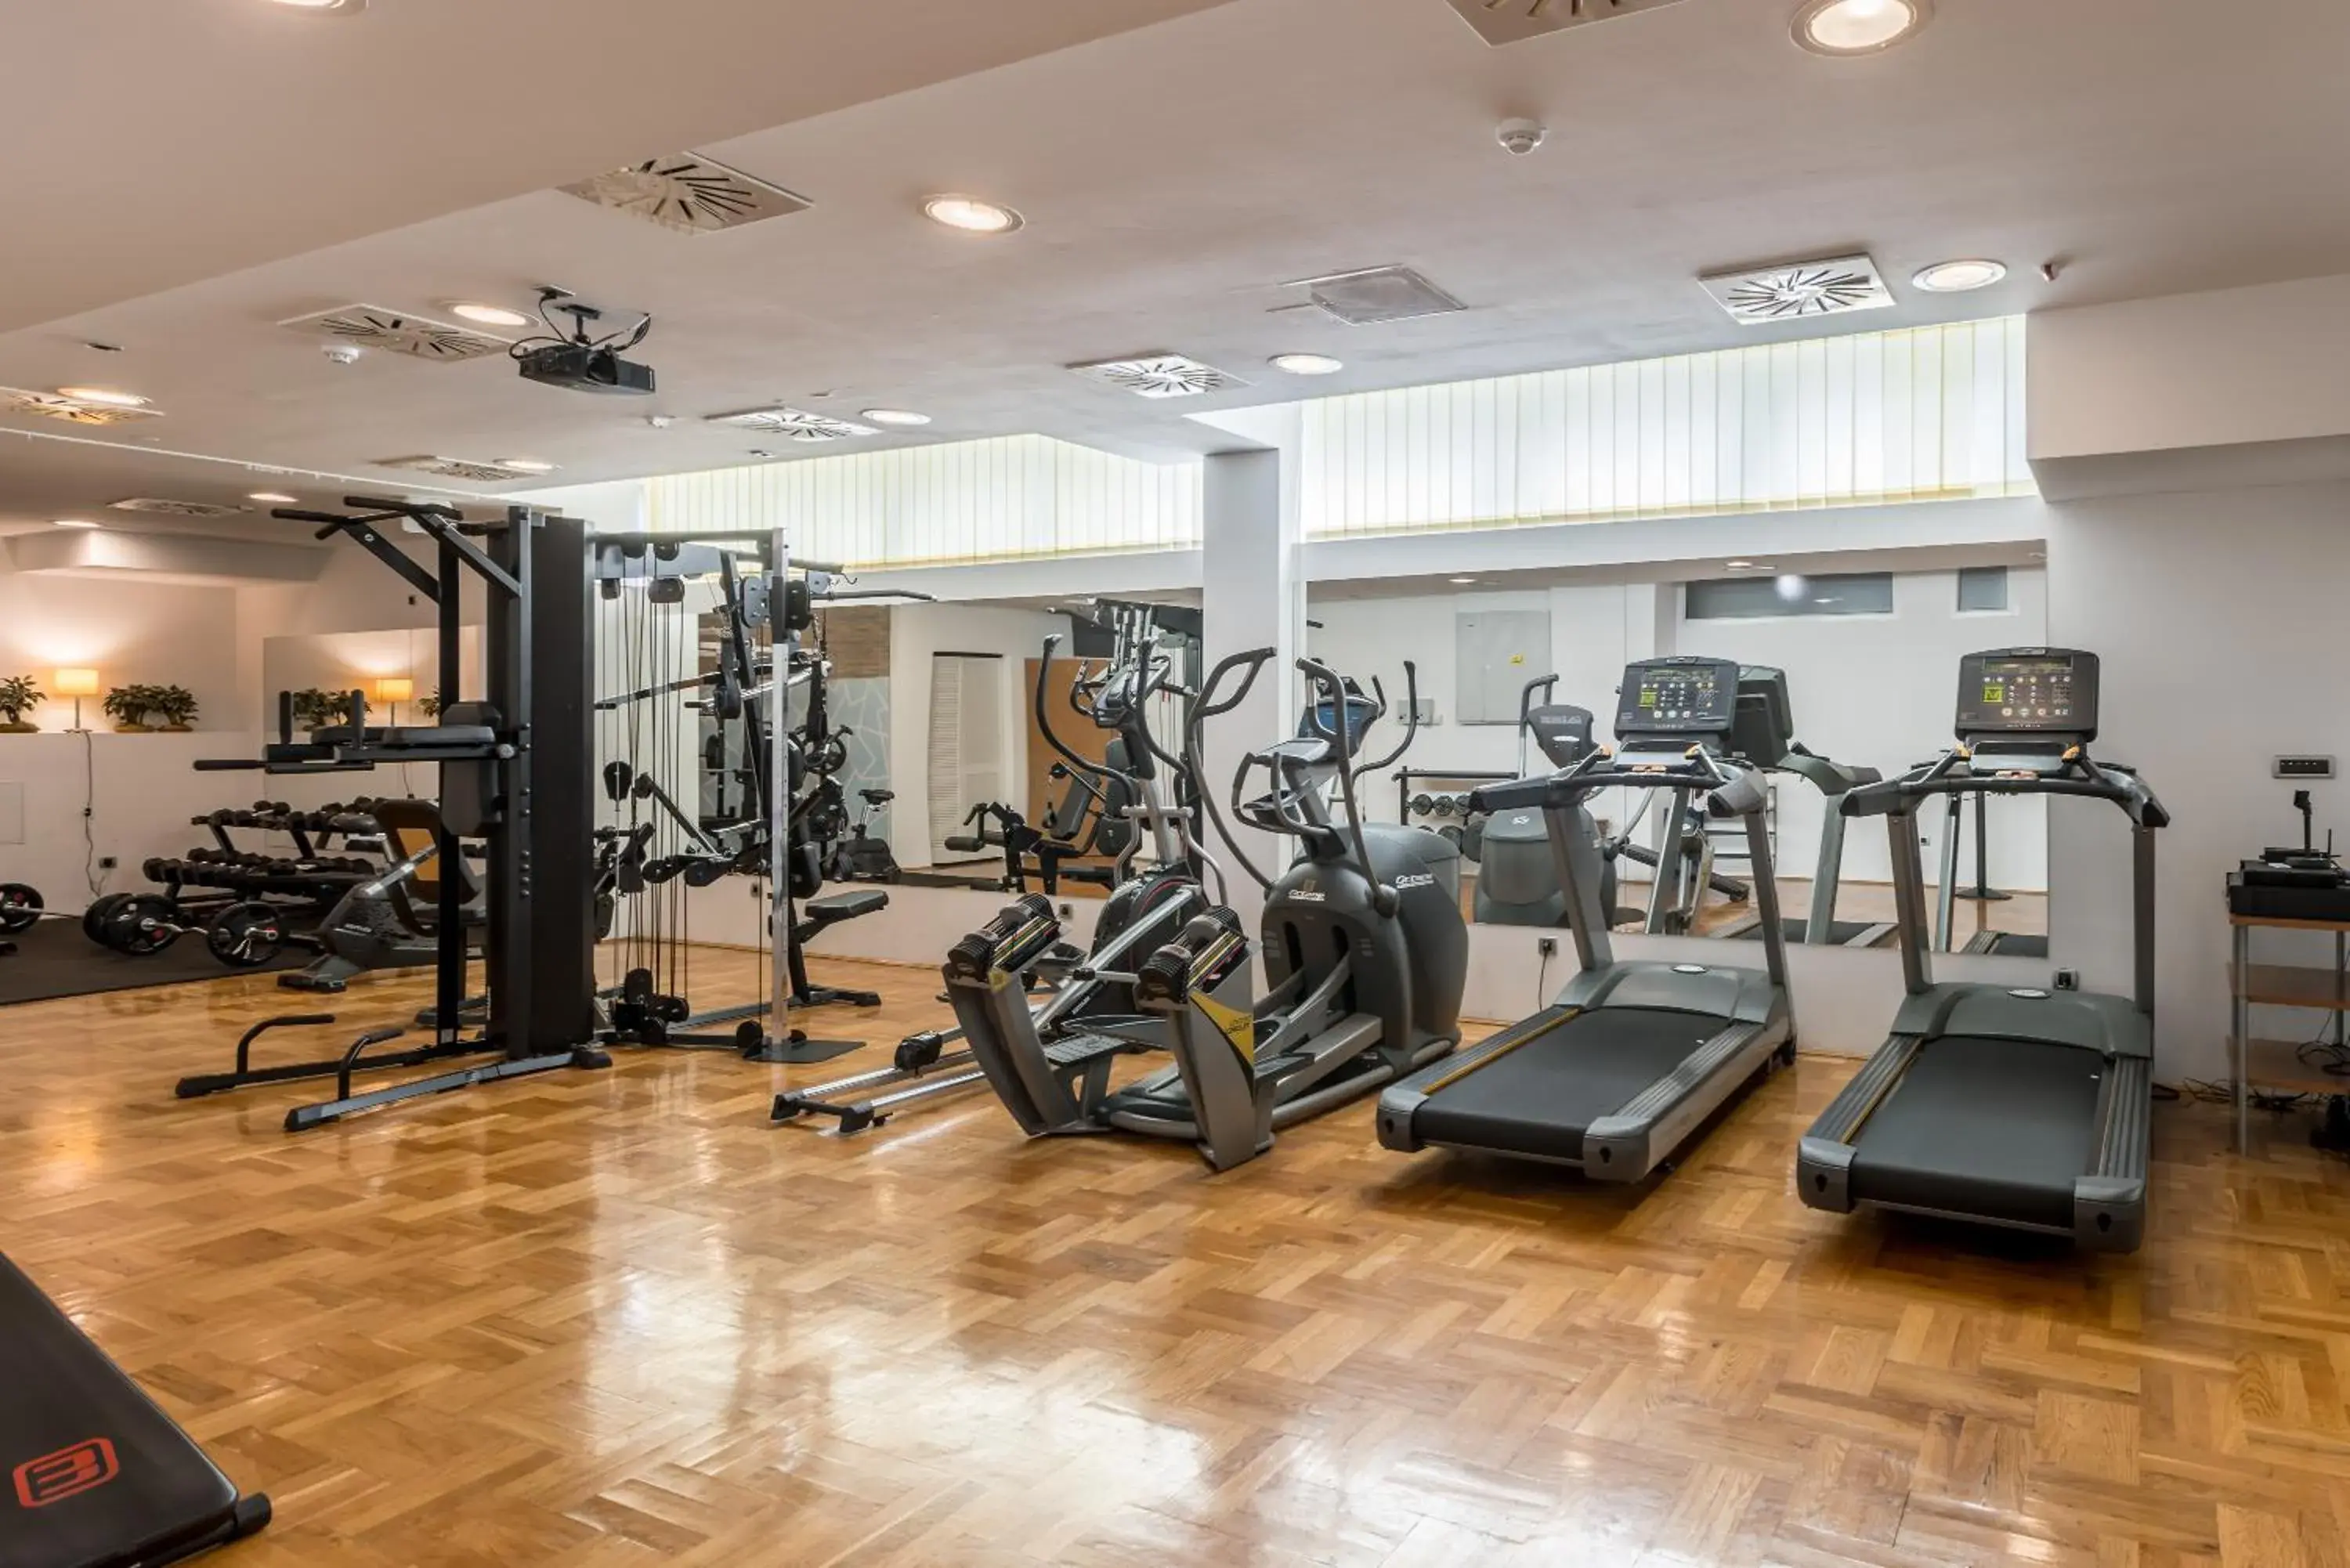 Fitness Center/Facilities in Annex building of Art Hotel